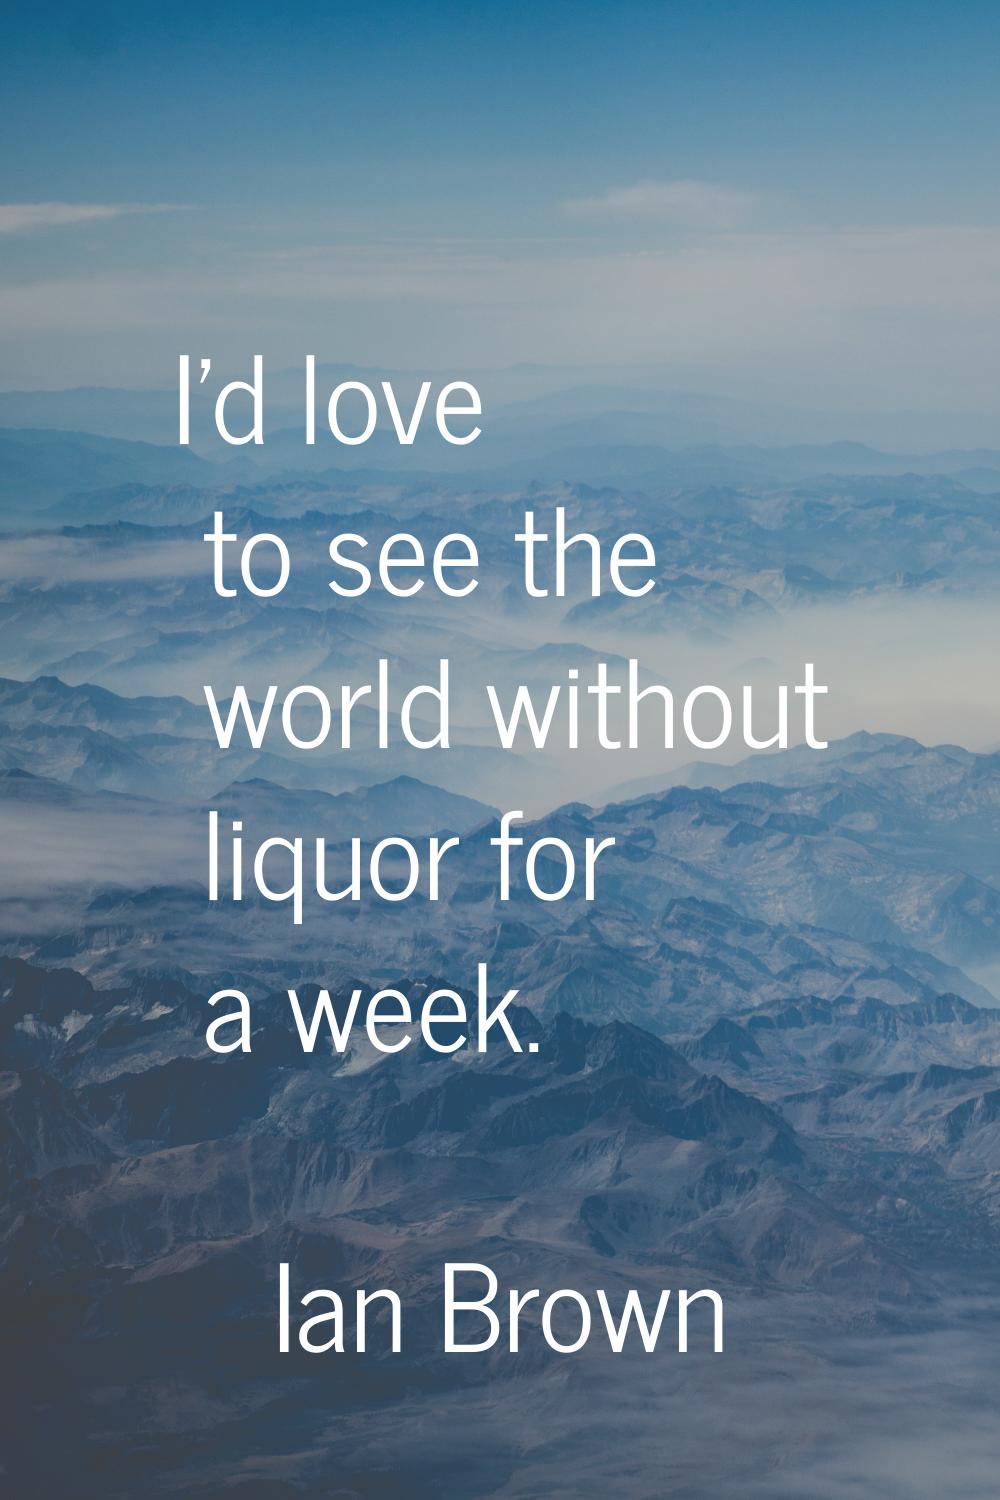 I'd love to see the world without liquor for a week.